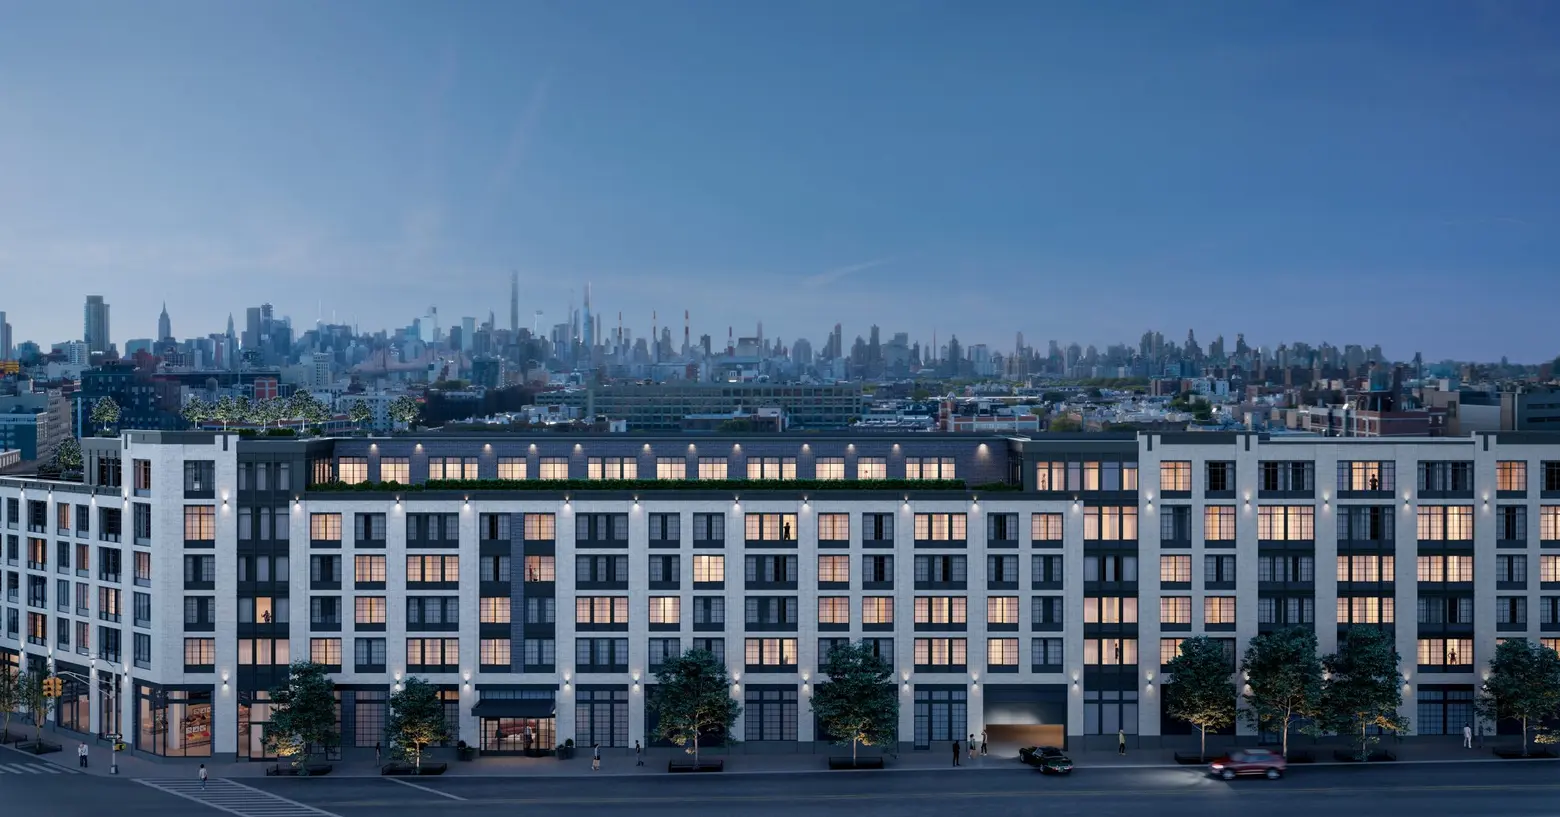 Apply for 43 affordable units at new amenity-rich rental in Long Island City, from $2,050/month